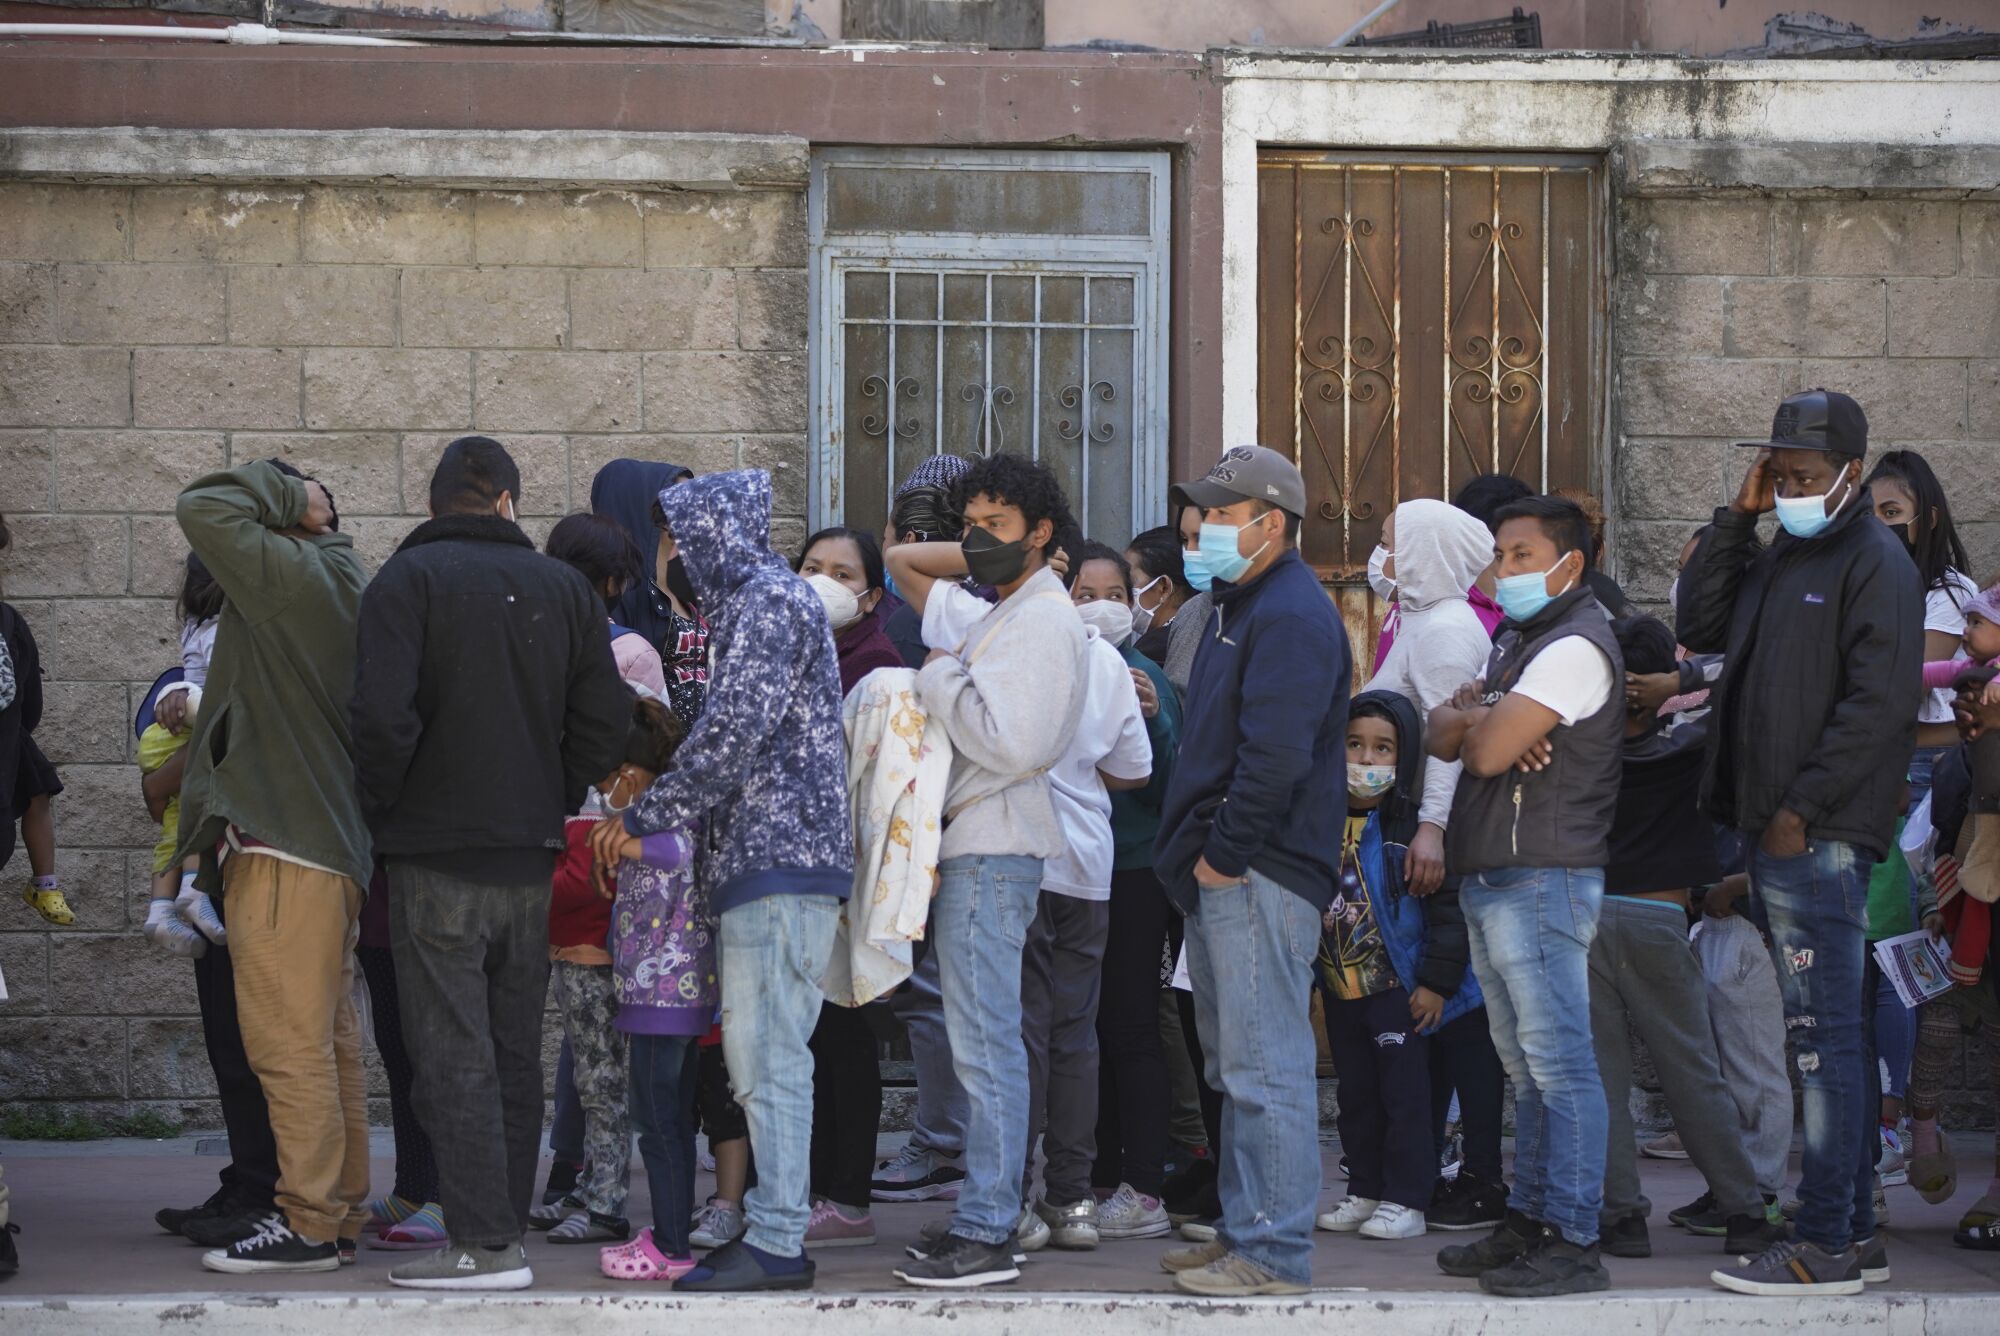 Asylum seekers wearing protective masks line up for food.